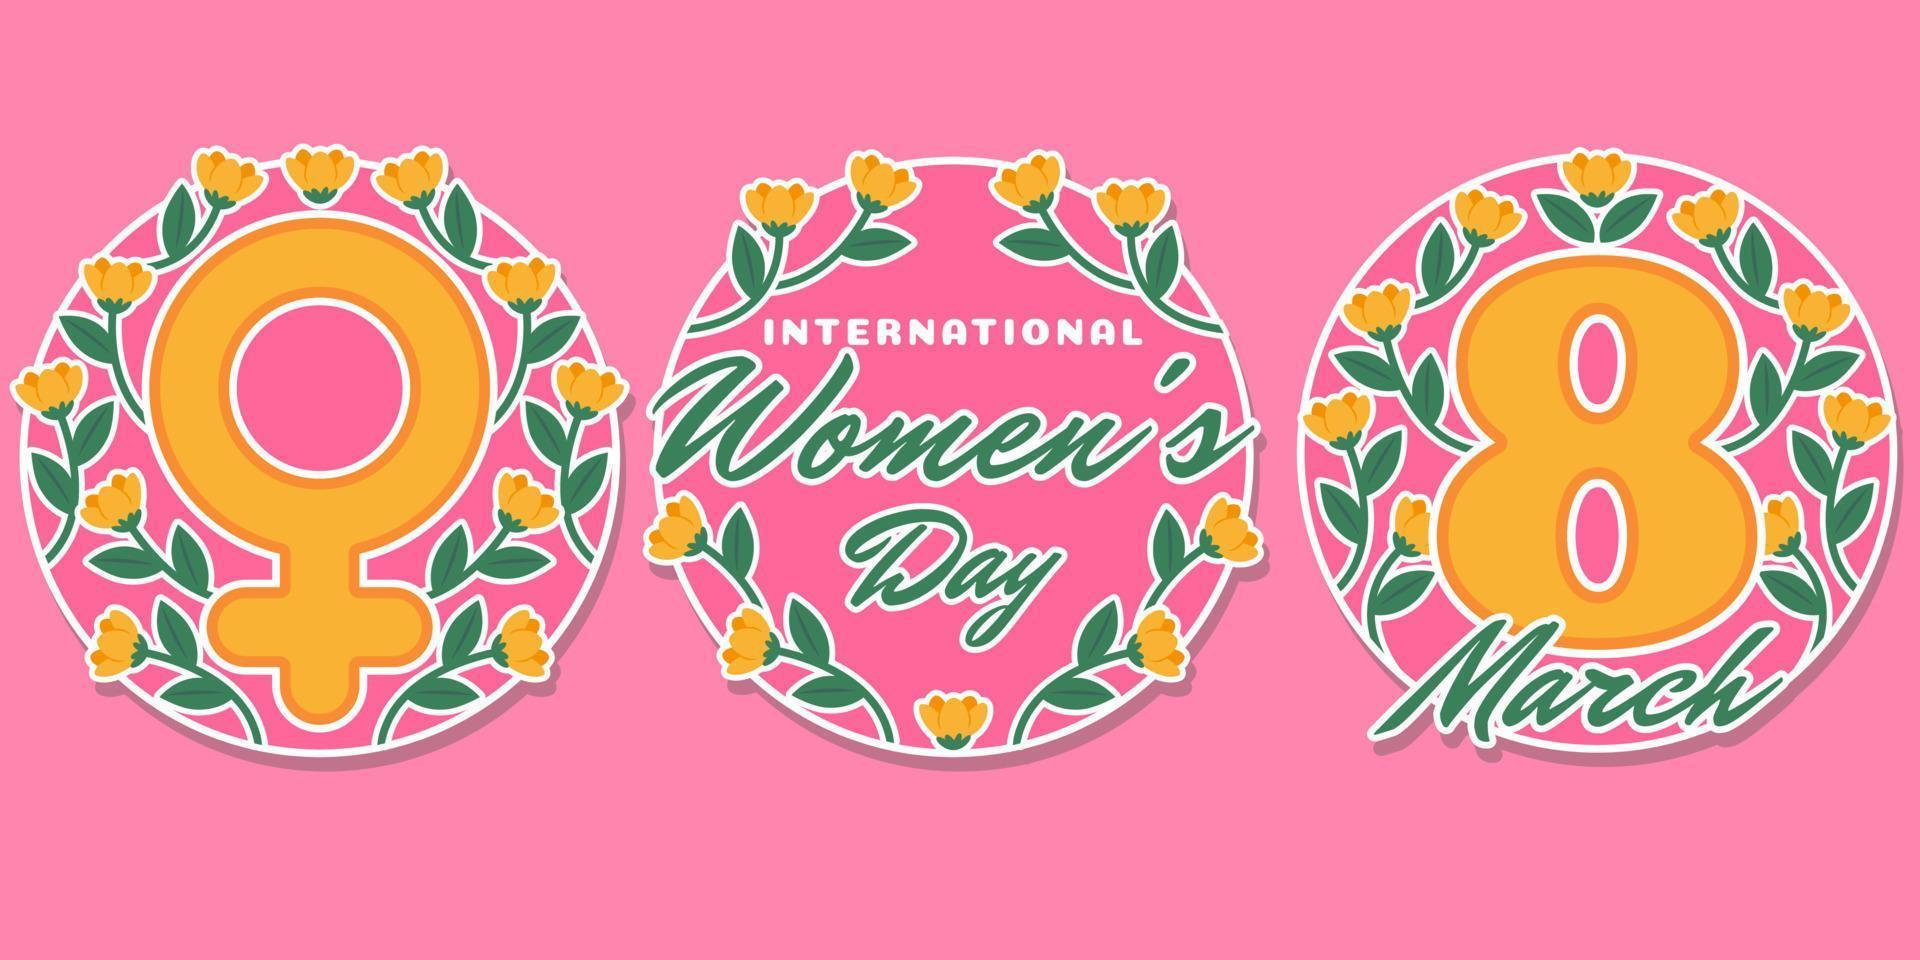 8 March International Womens Day poster design vector